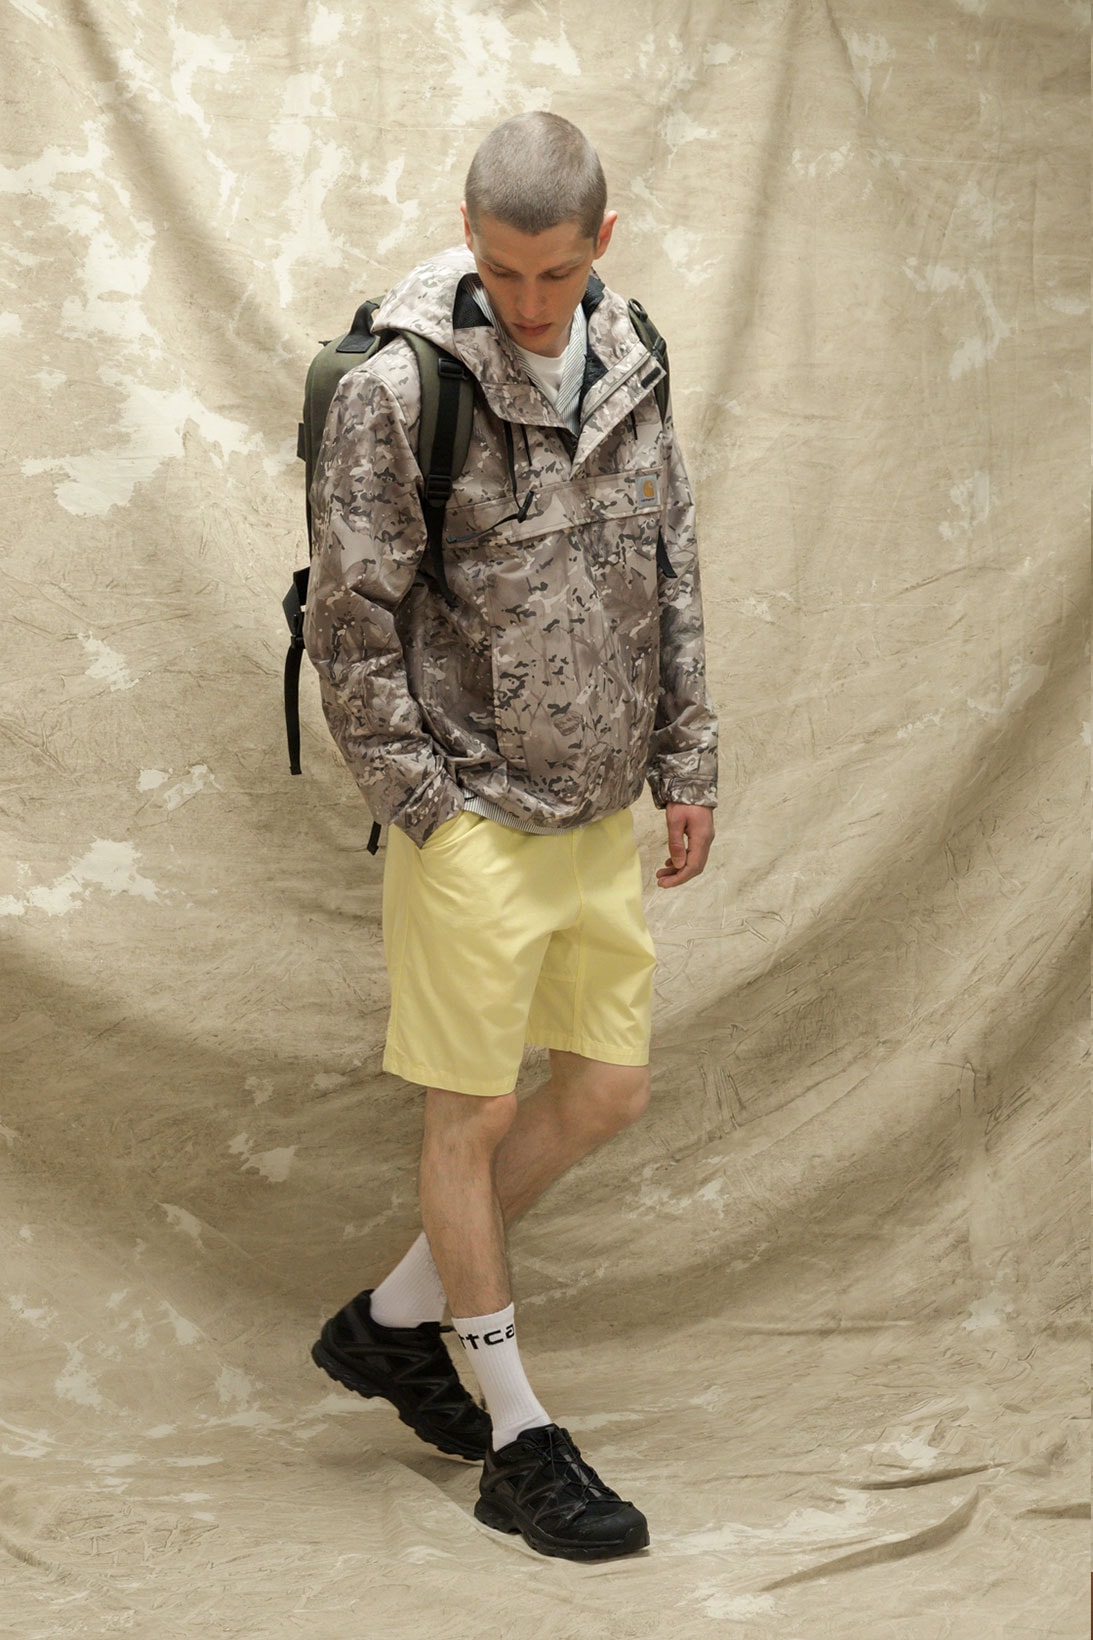 carhartt wip spring summer 2021 ss21 collection lookbook military camo jumper half zip backpack shorts